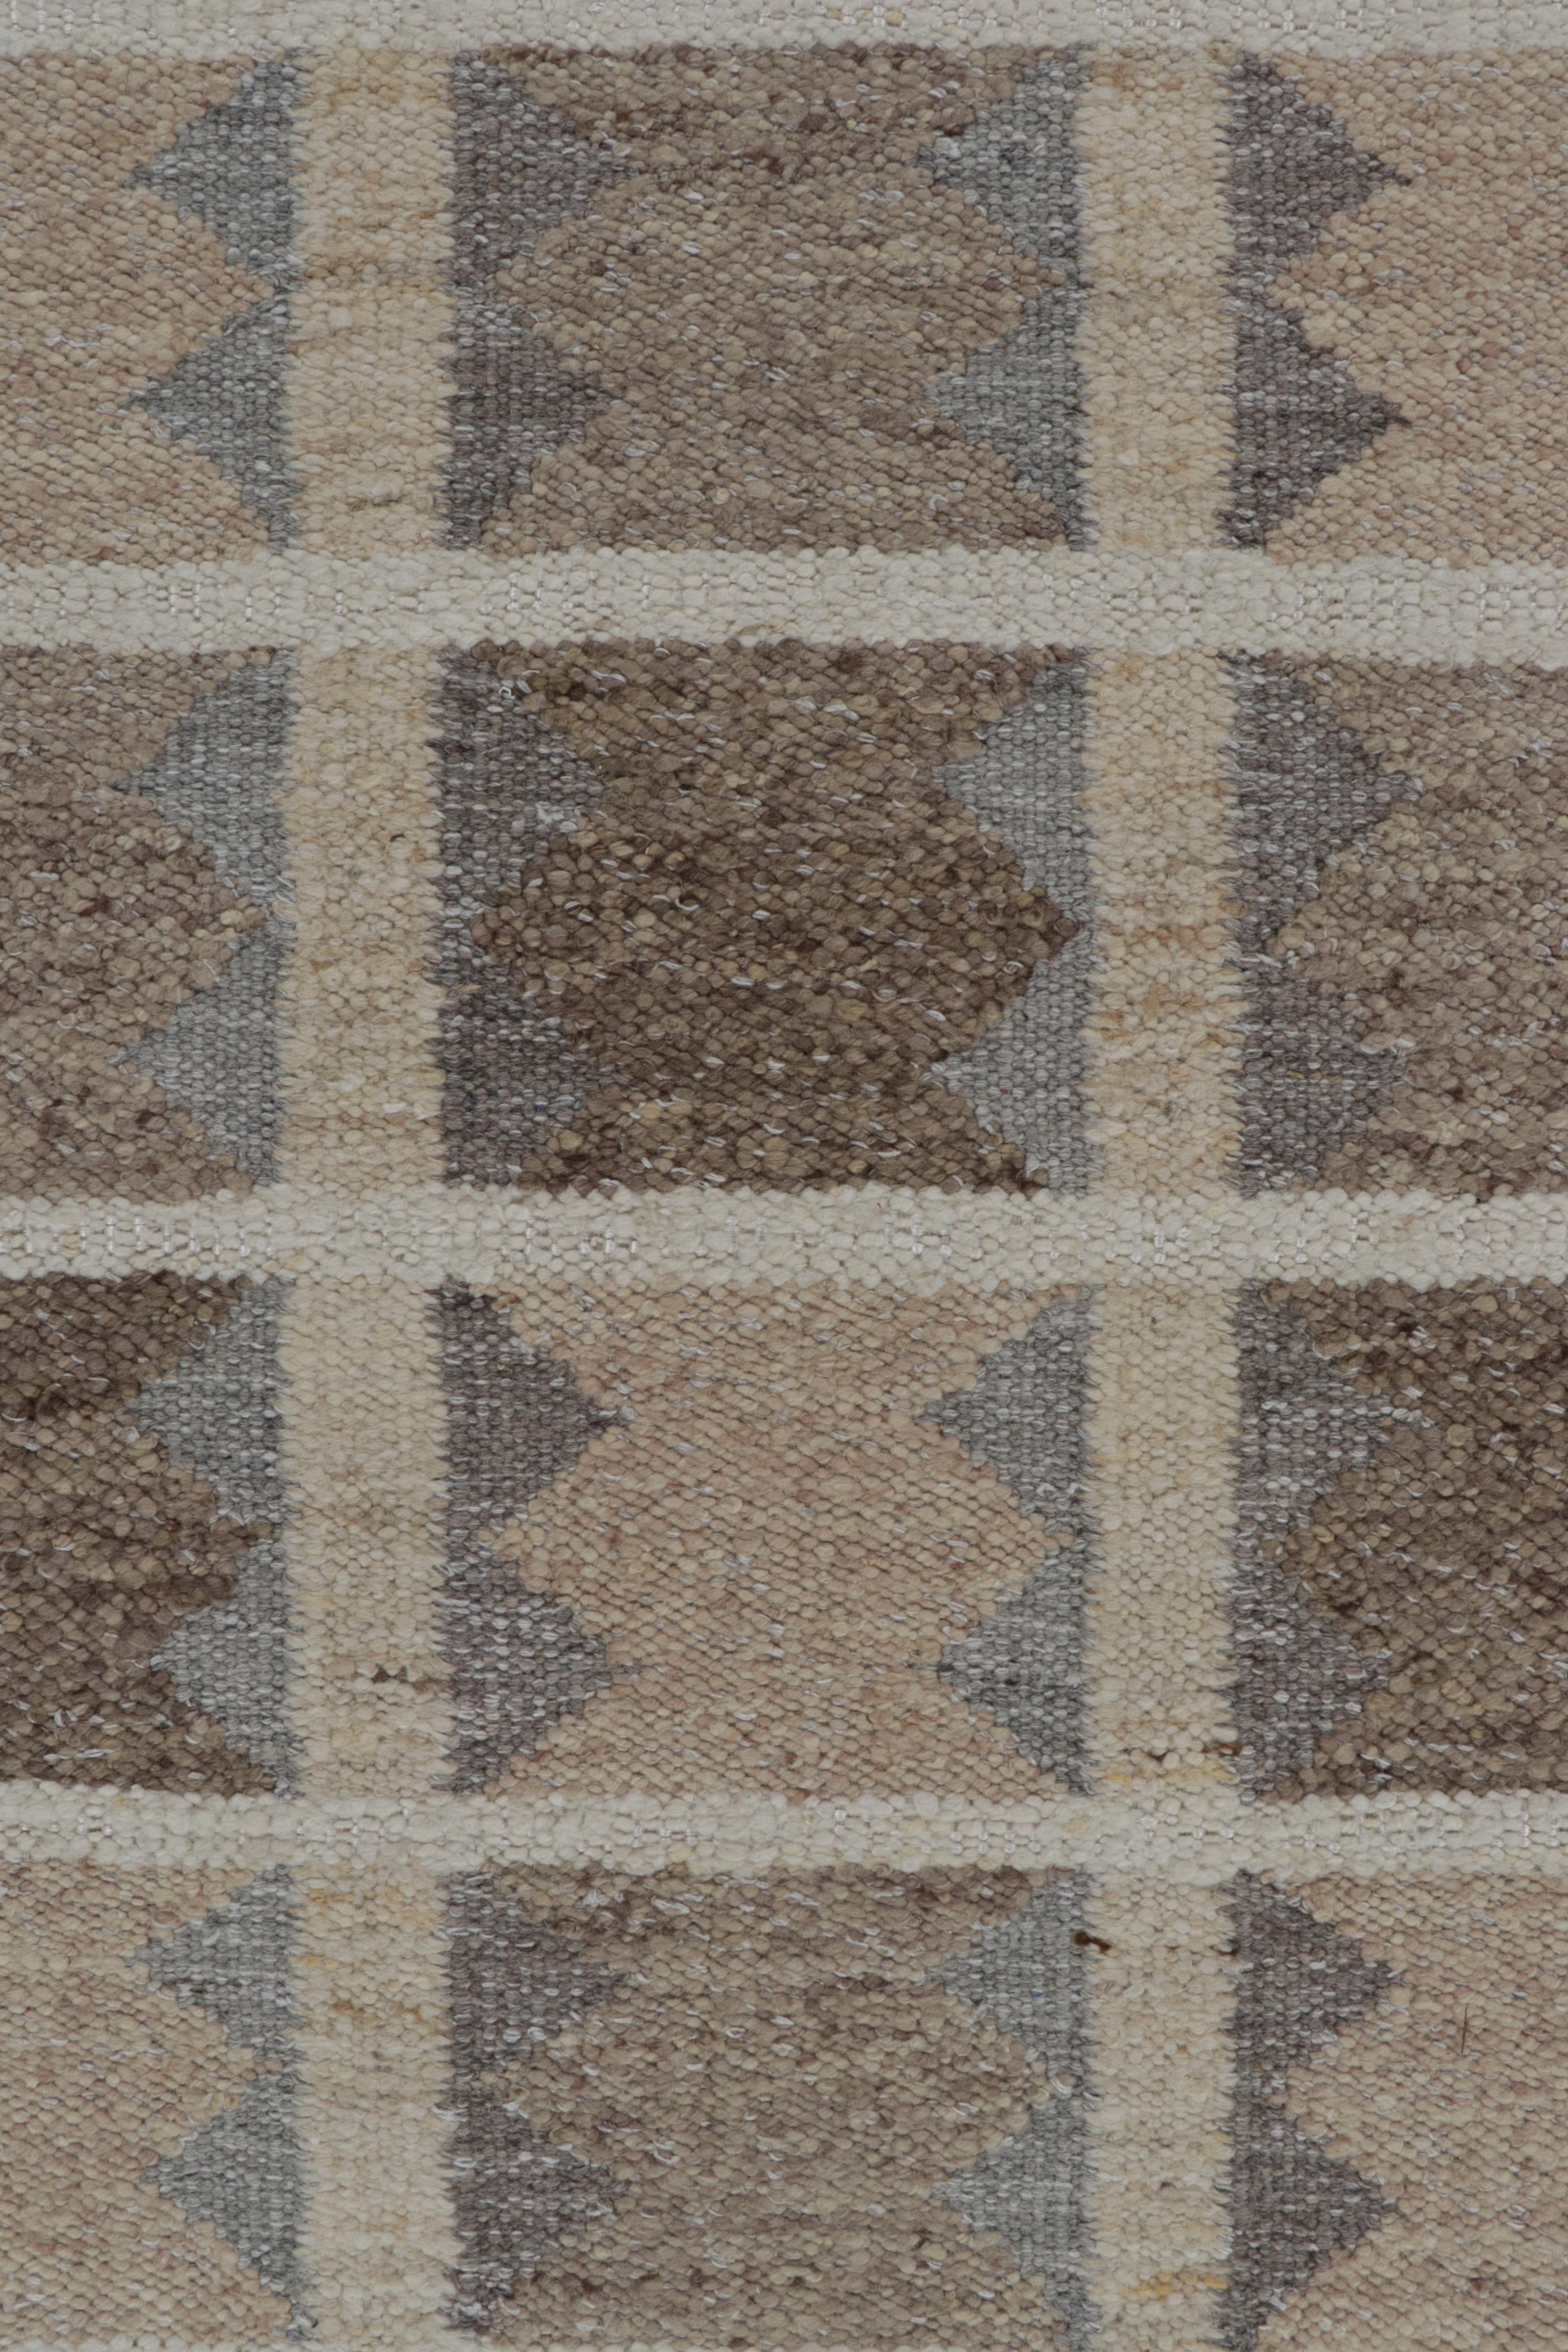 Rug & Kilim’s Scandinavian Style Kilim in Beige, Brown & Gray Geometric Patterns In New Condition For Sale In Long Island City, NY